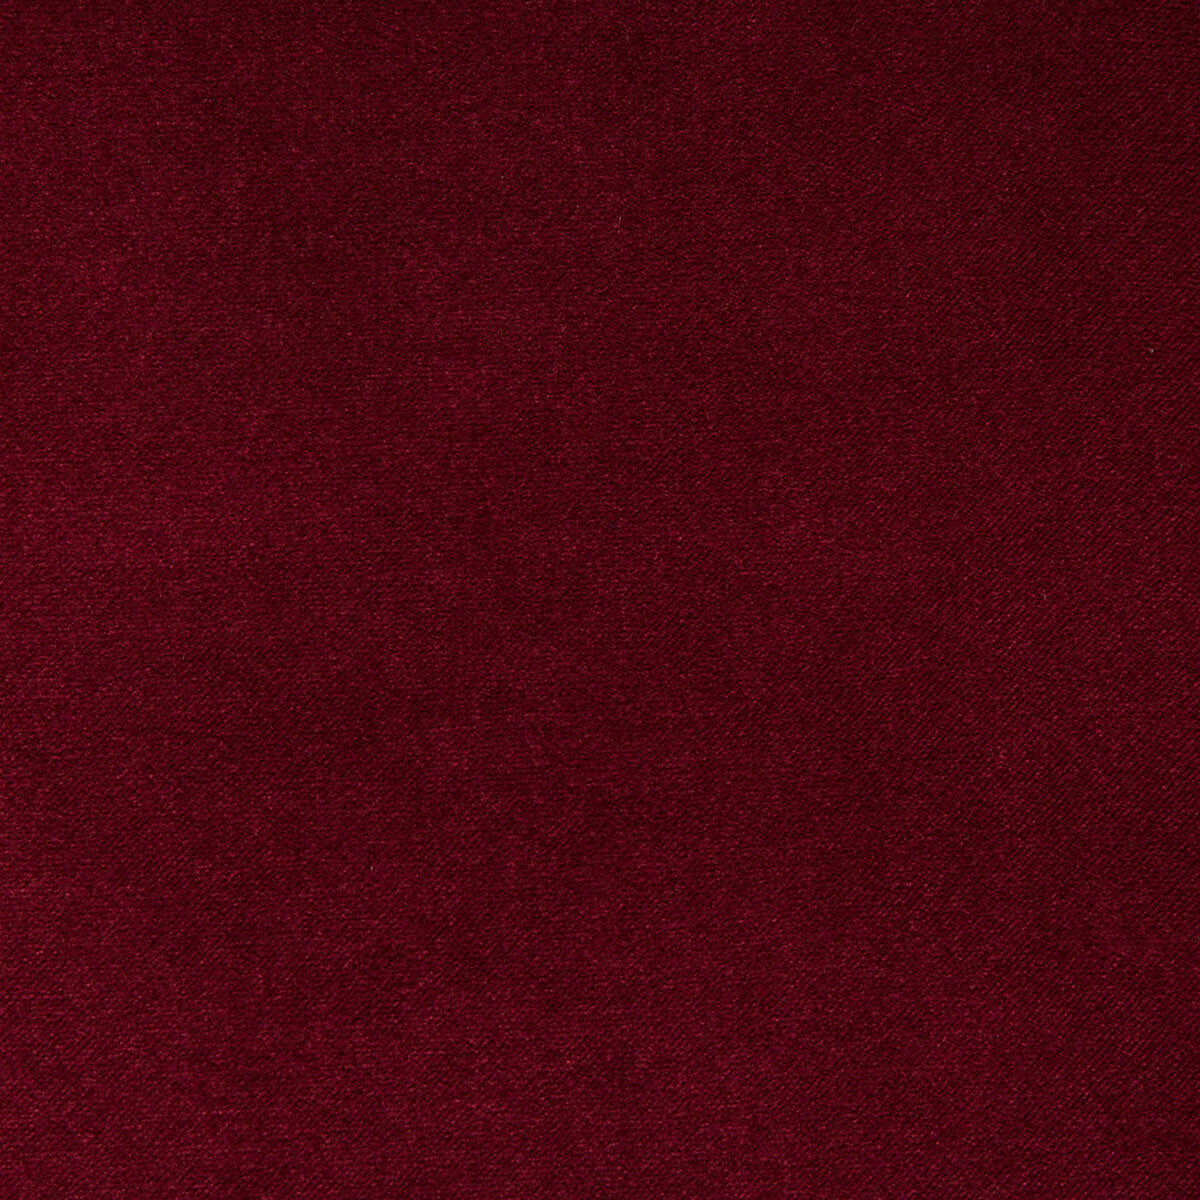 Madison Velvet fabric in cranberry color - pattern 35402.9.0 - by Kravet Contract